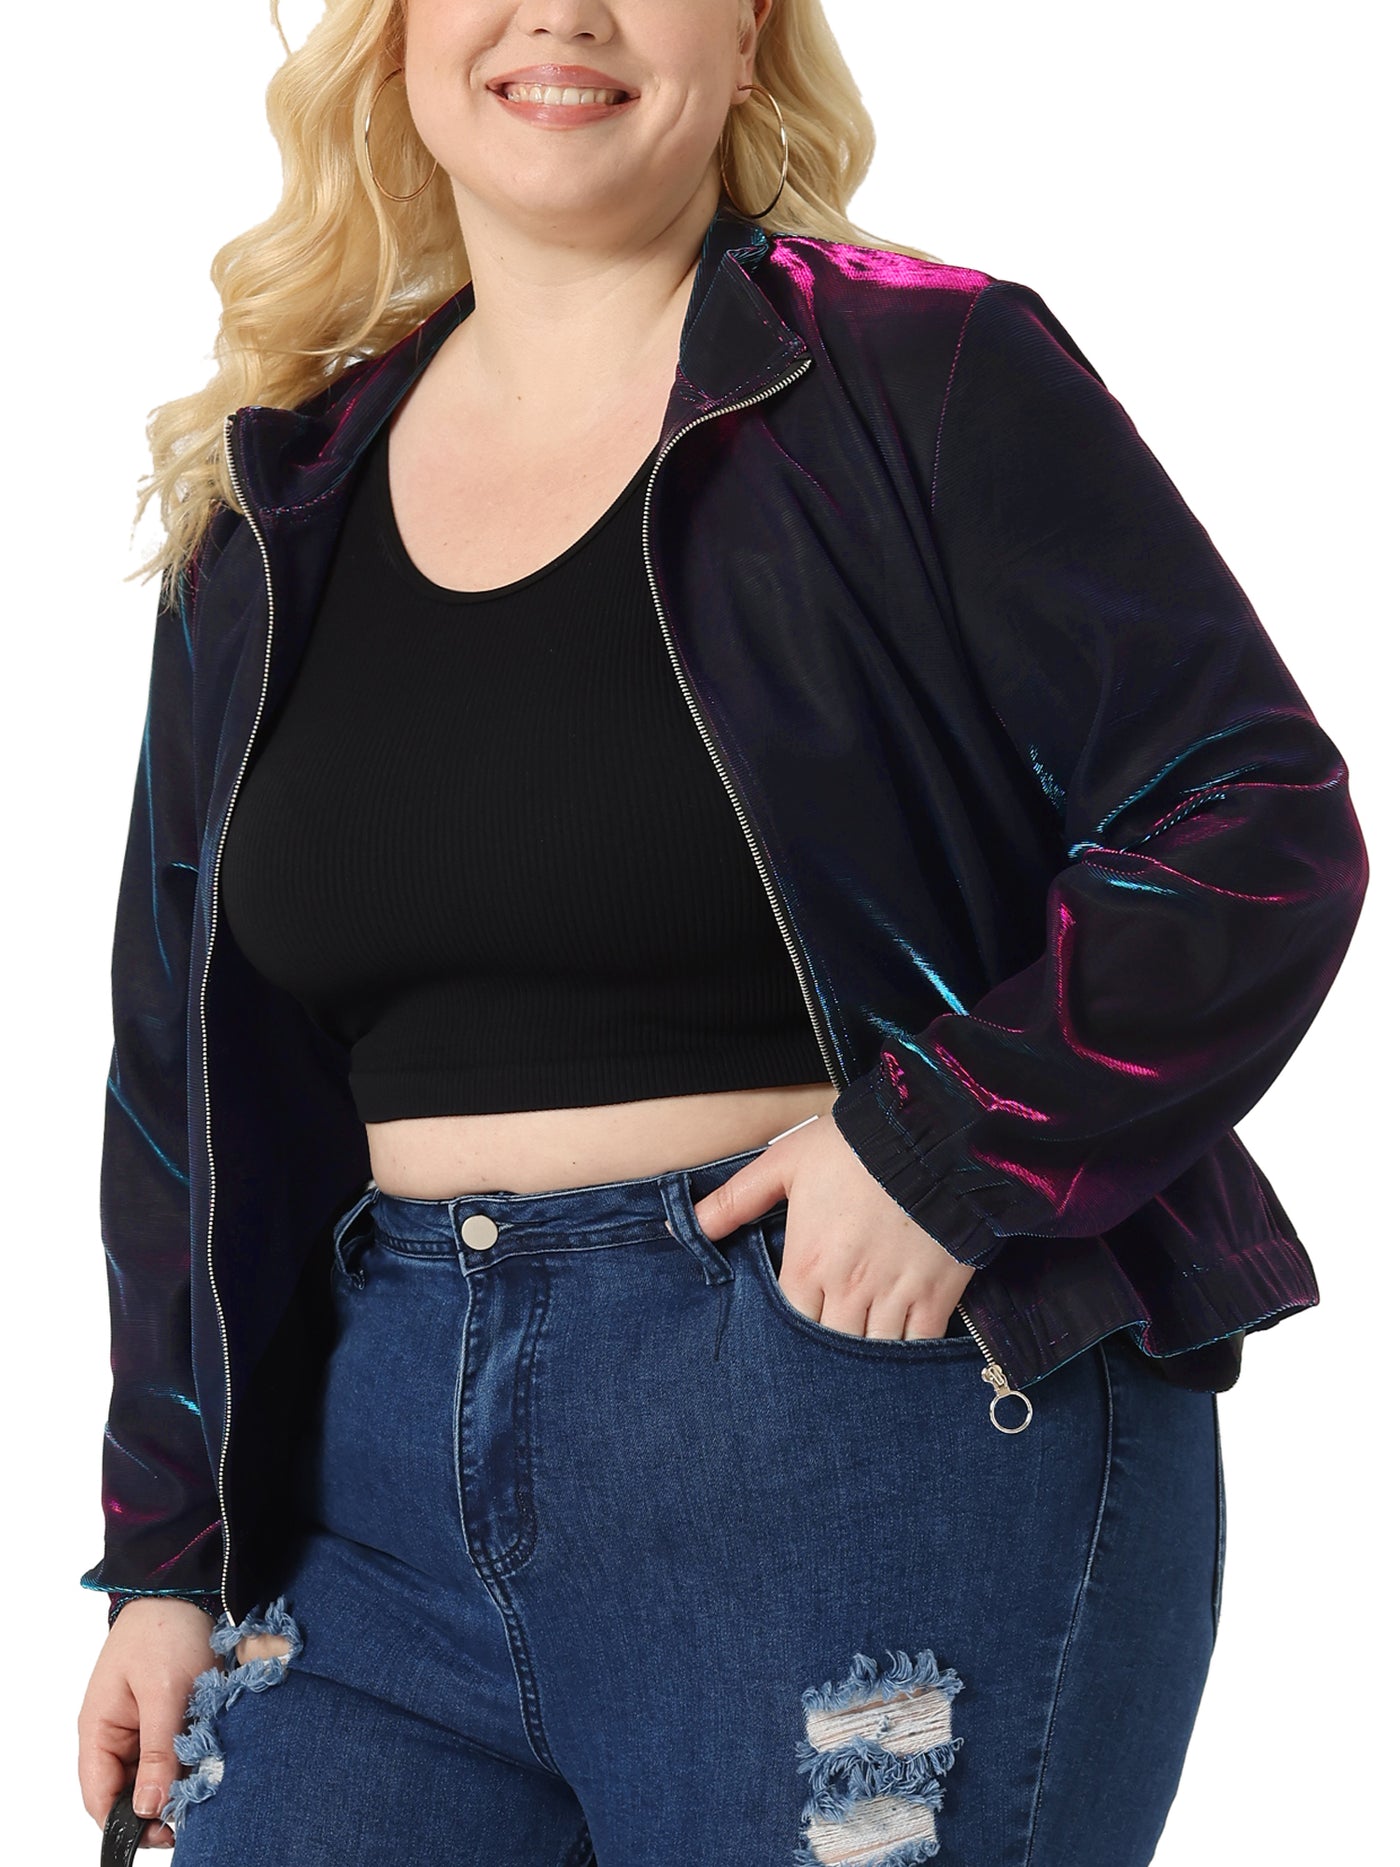 Bublédon Plus Size Mesh Jackets for Women Holographic Long Sleeve Zip Up Clubwear Party Jacket